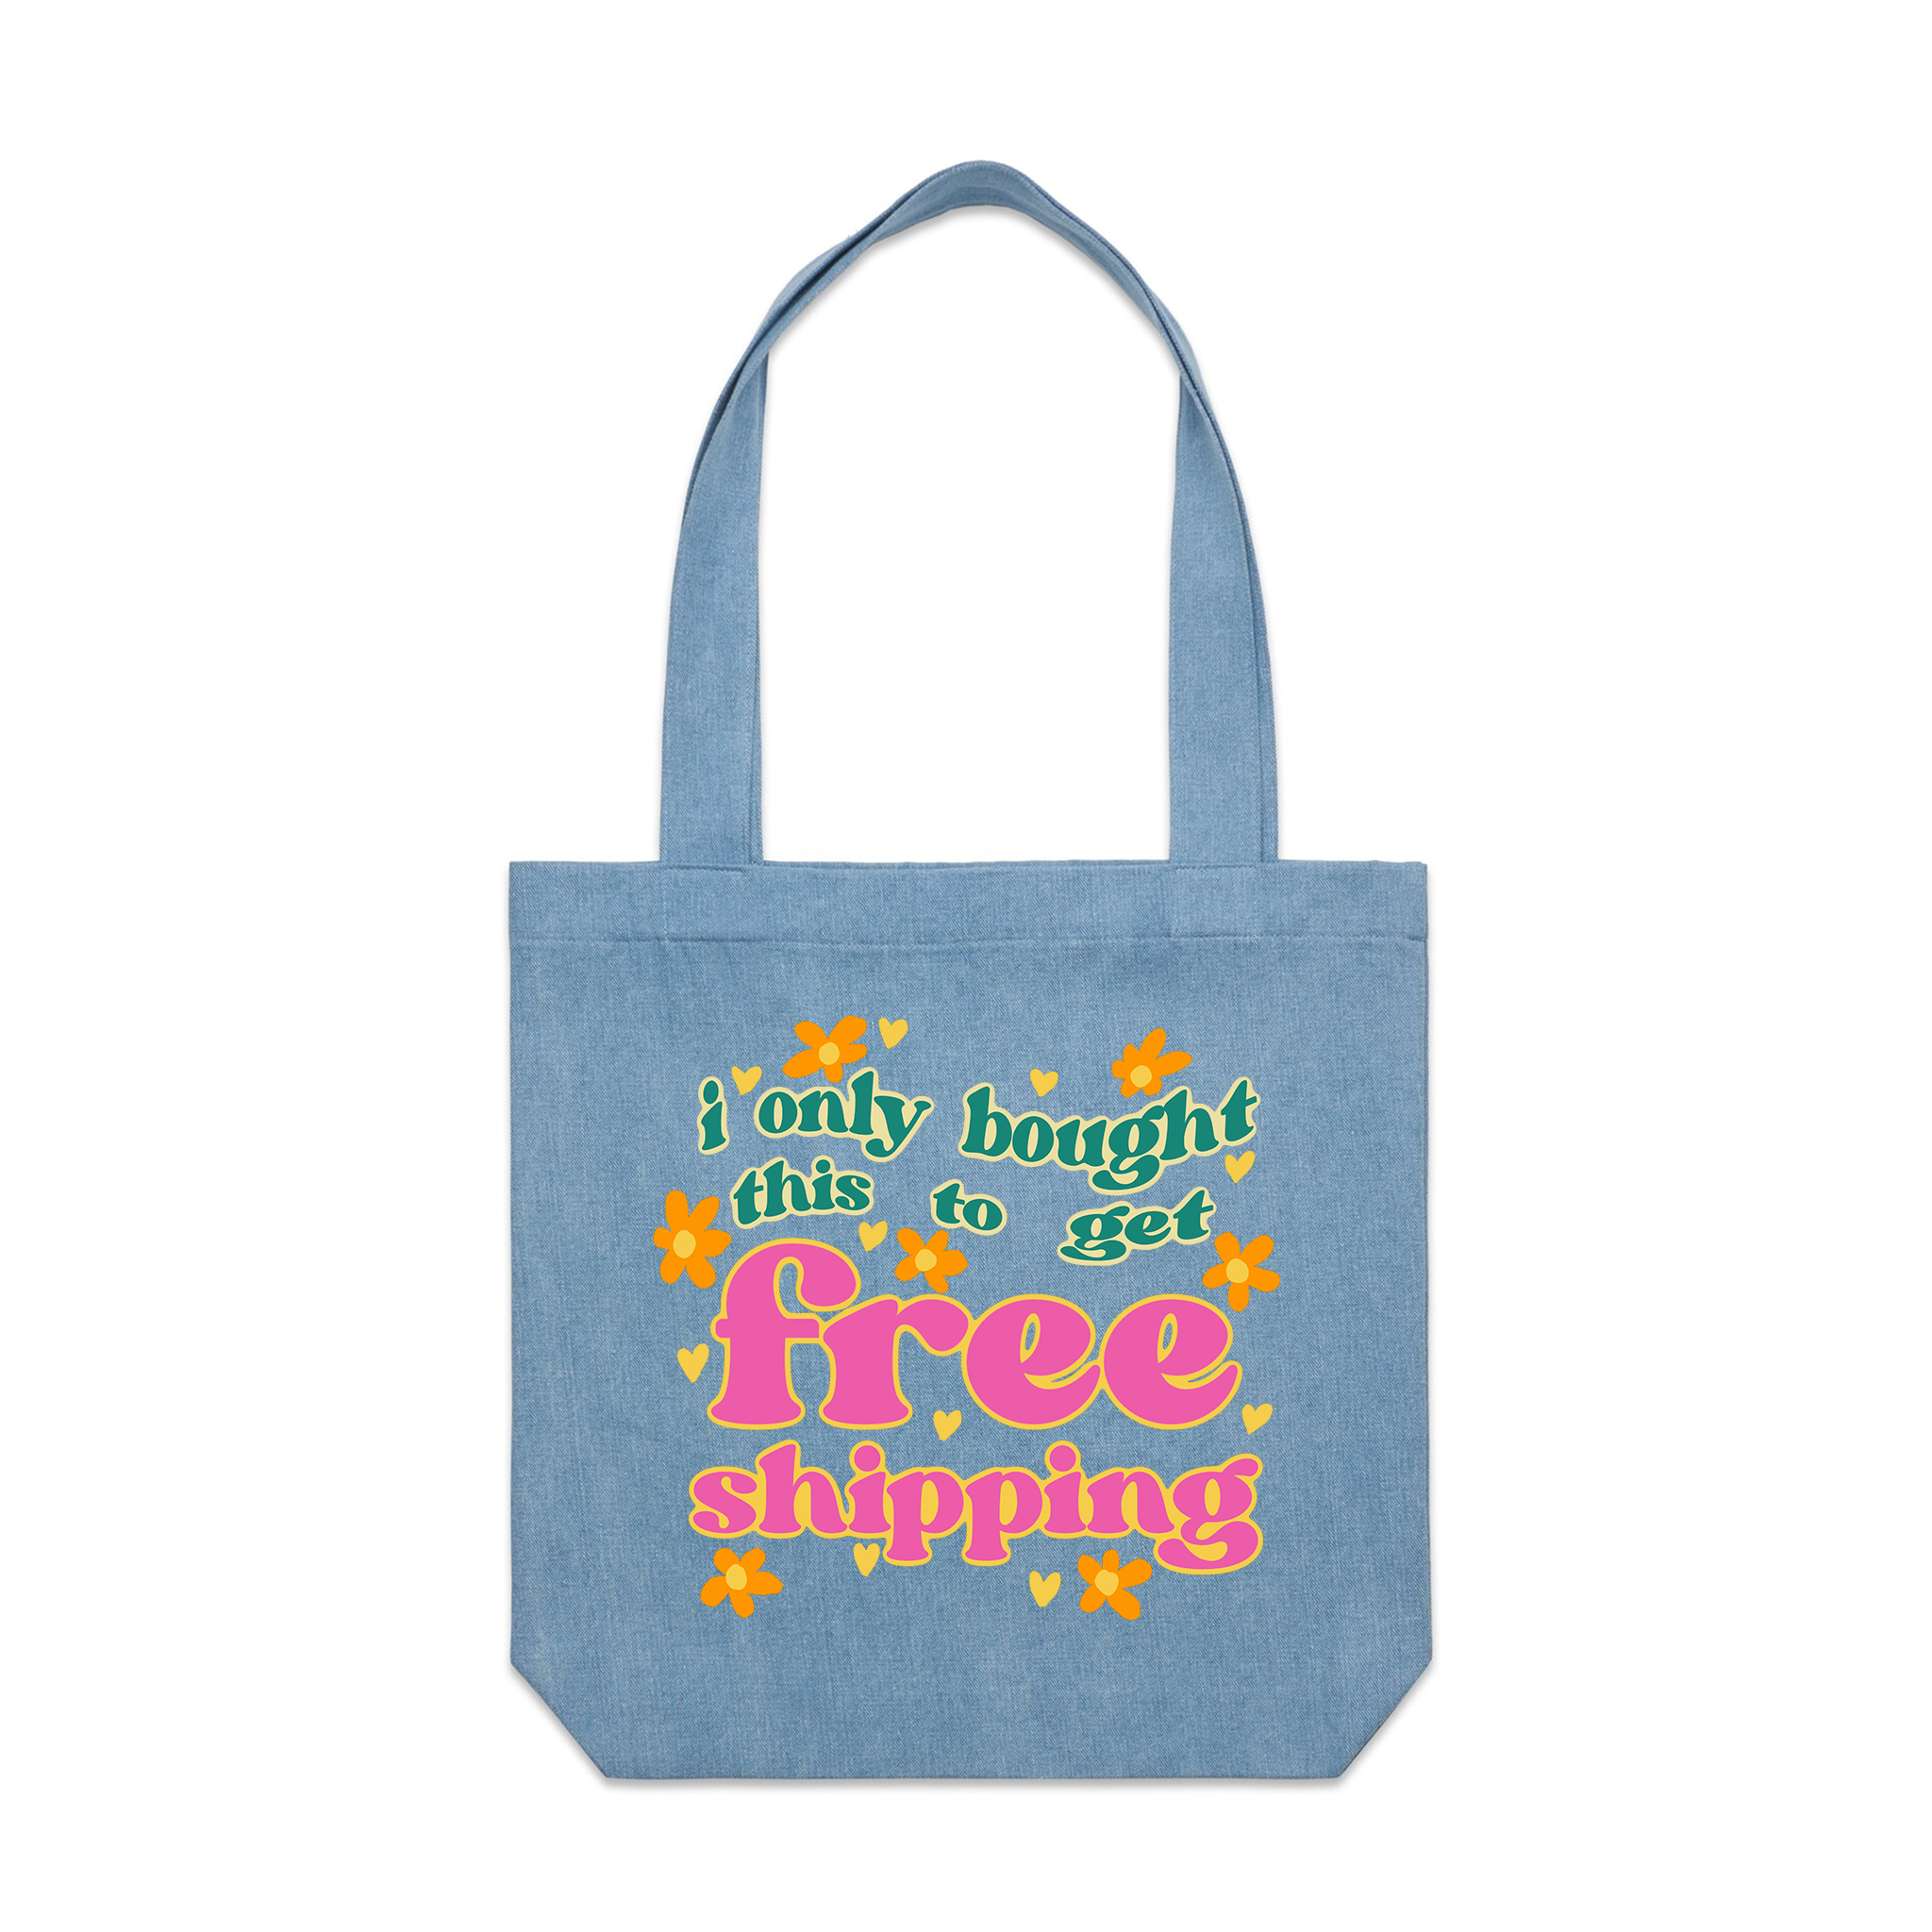 Free Shipping Tote